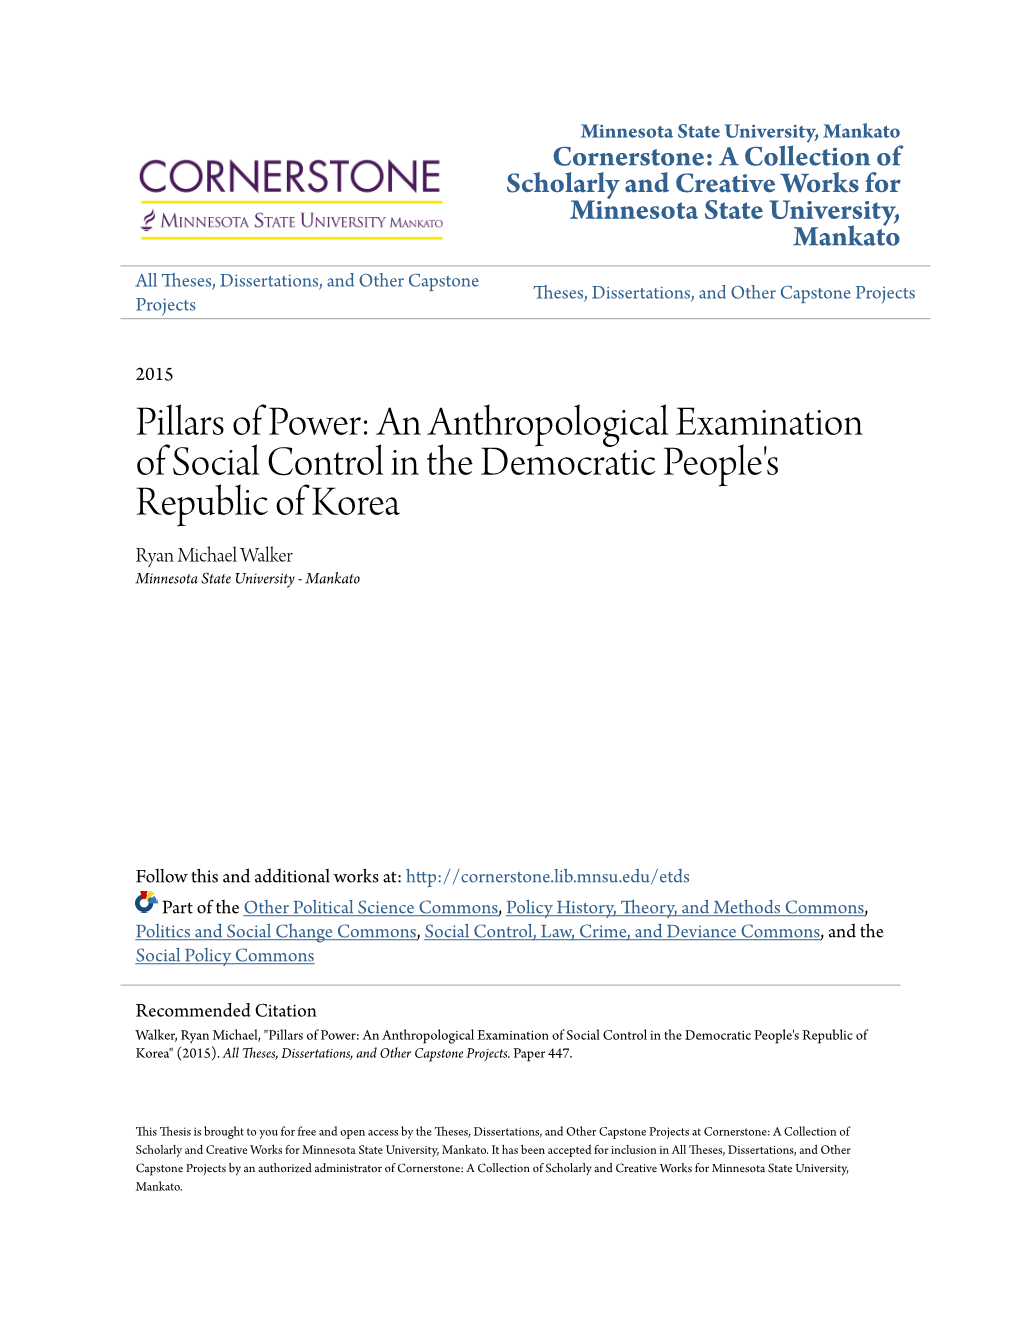 An Anthropological Examination of Social Control in the Democratic People's Republic of Korea Ryan Michael Walker Minnesota State University - Mankato